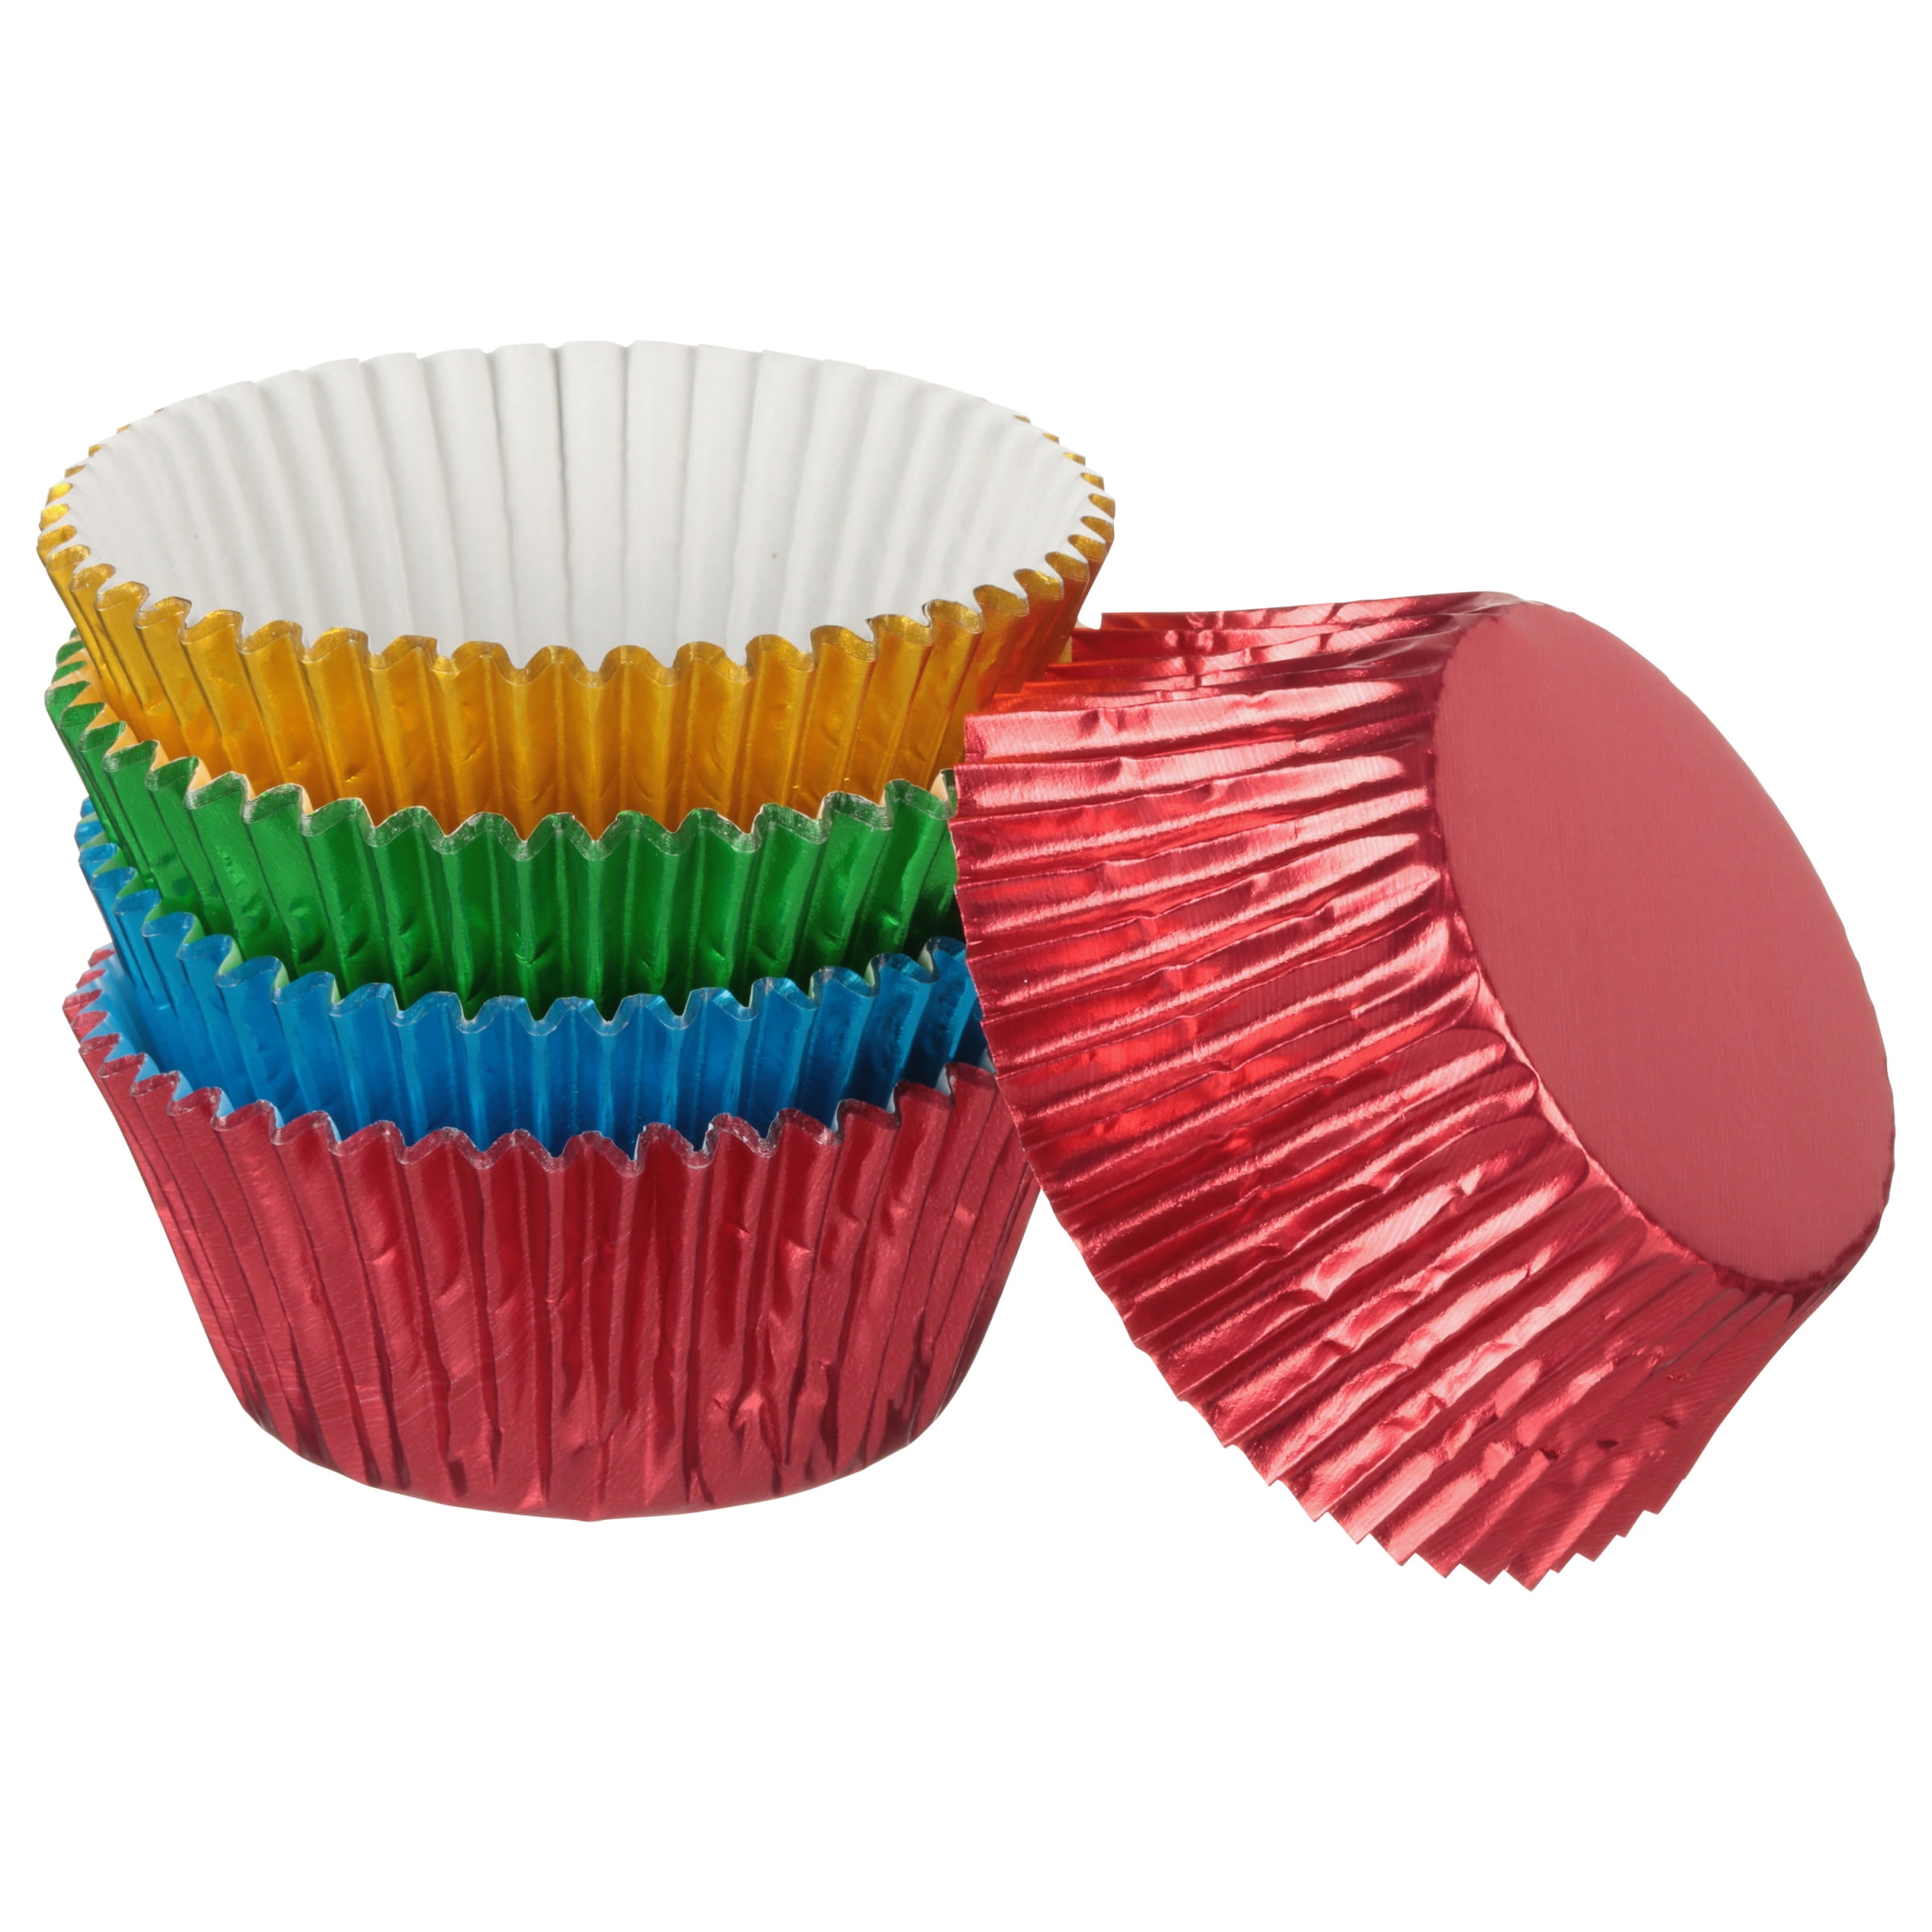 STANDARD Foil Cupcake Liners / Baking Cups – 50 ct LT BLUE – Cake Connection